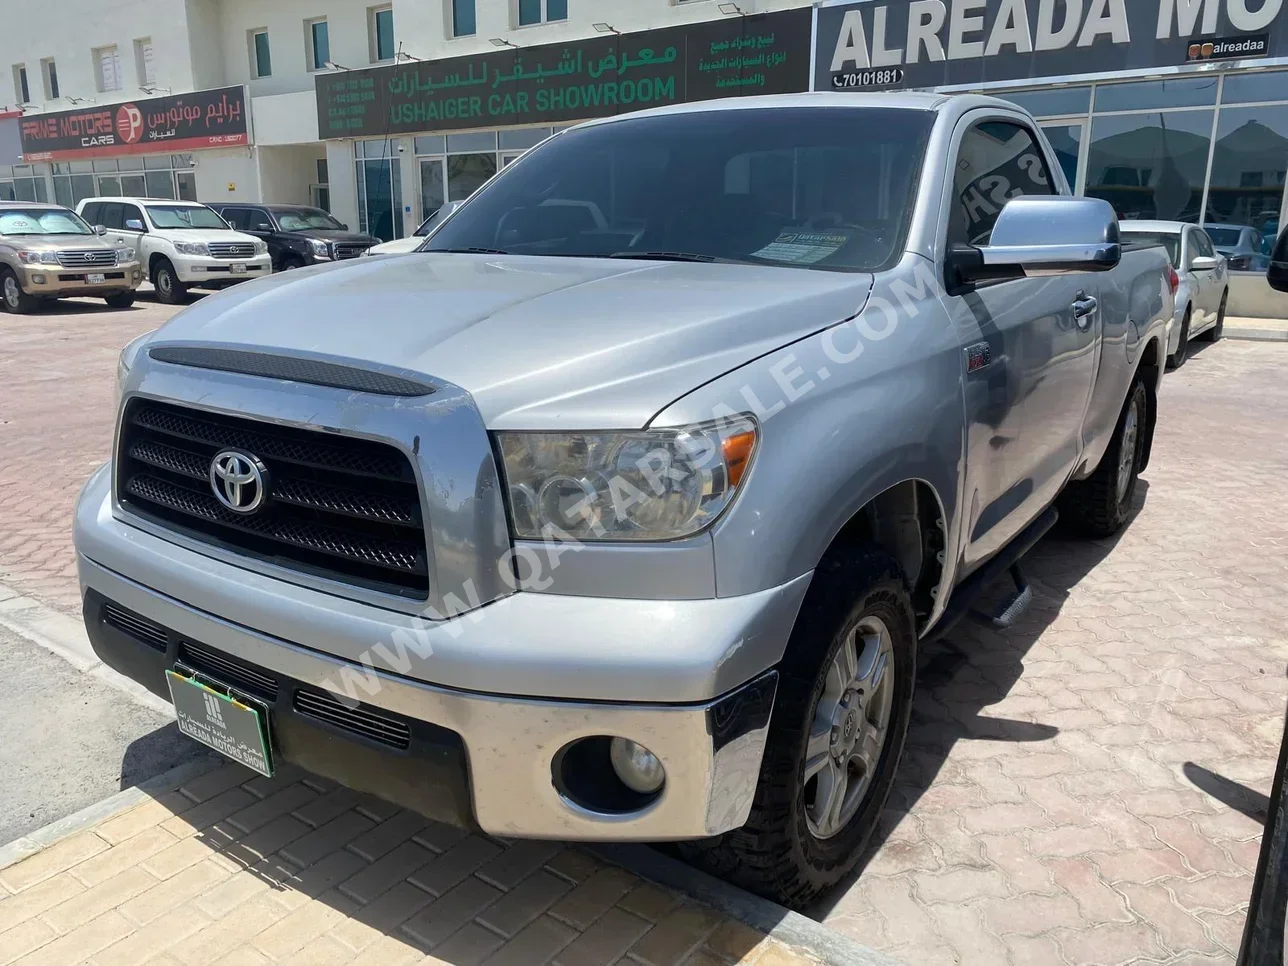 Toyota  Tundra  2008  Automatic  195,000 Km  8 Cylinder  Four Wheel Drive (4WD)  Pick Up  Silver